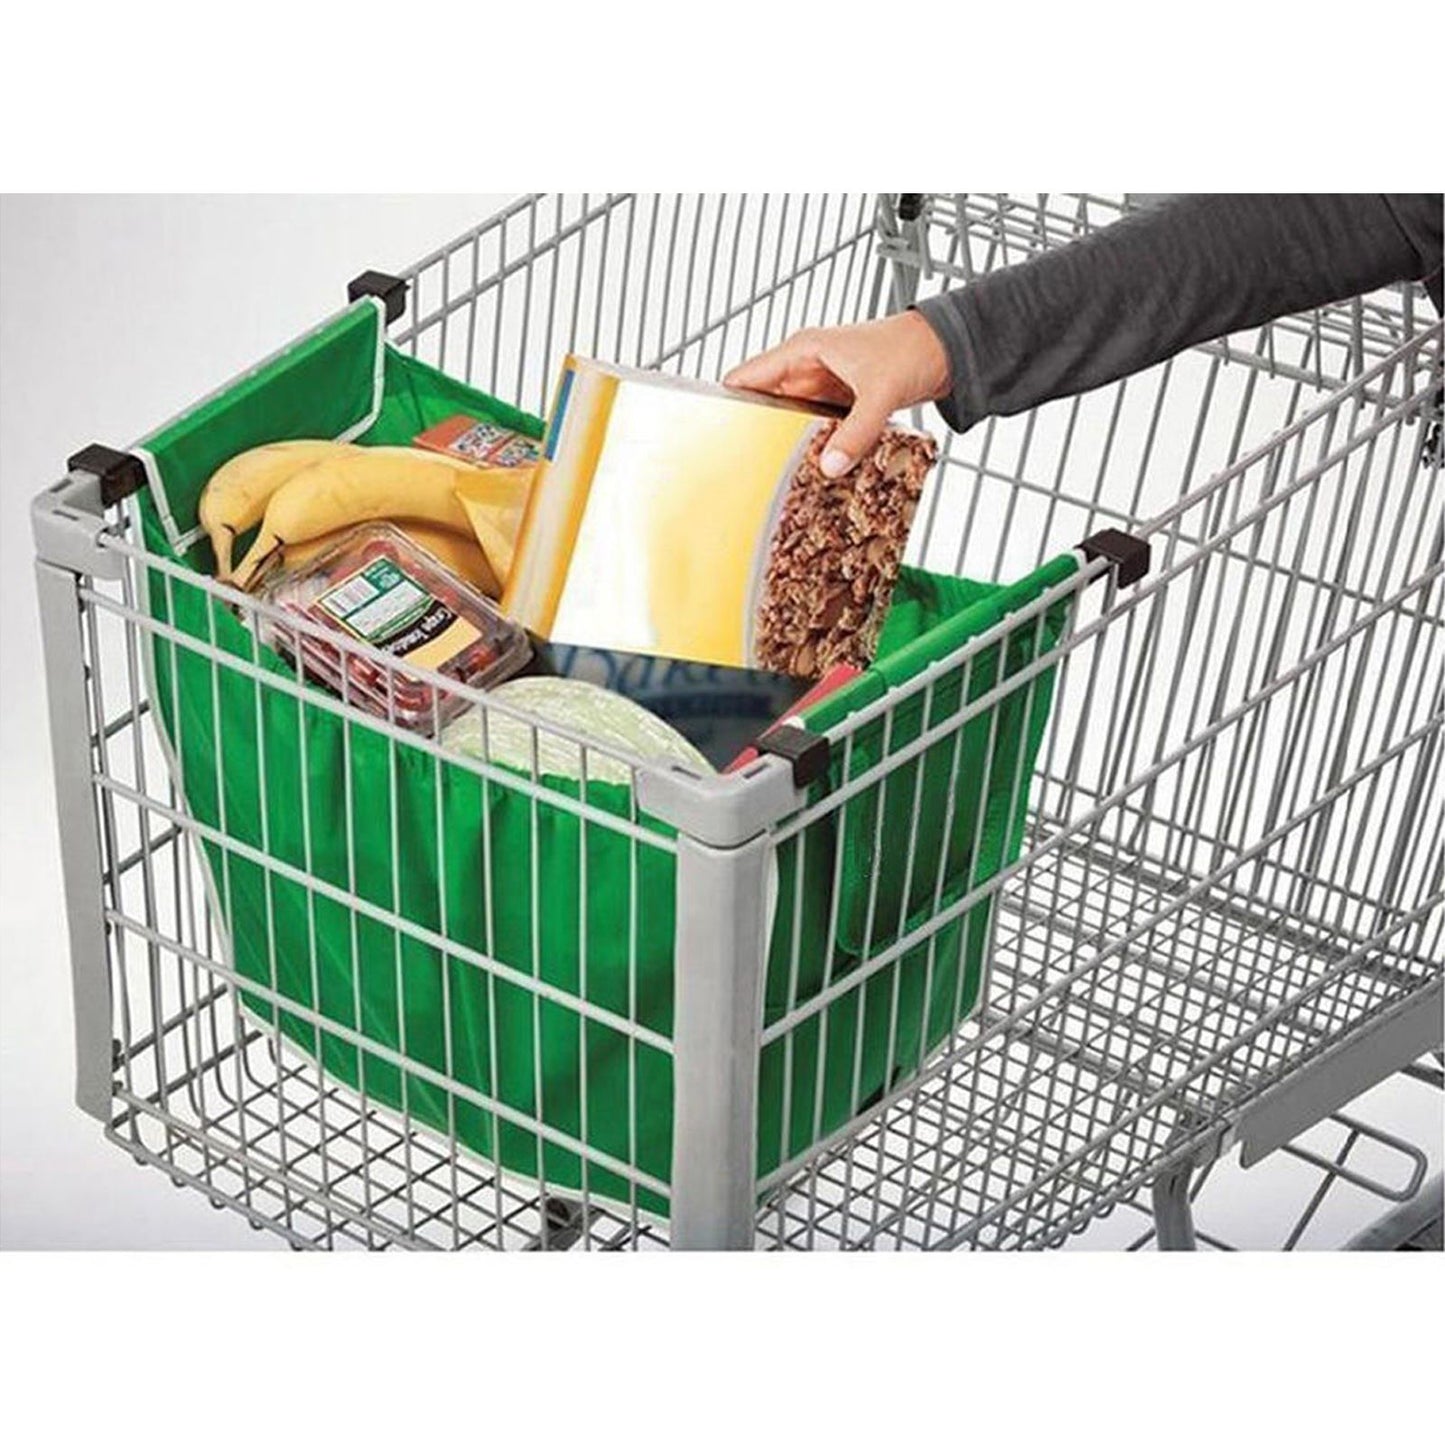 Convenient And Sturdy Shopping Trolleys For Easy Transport